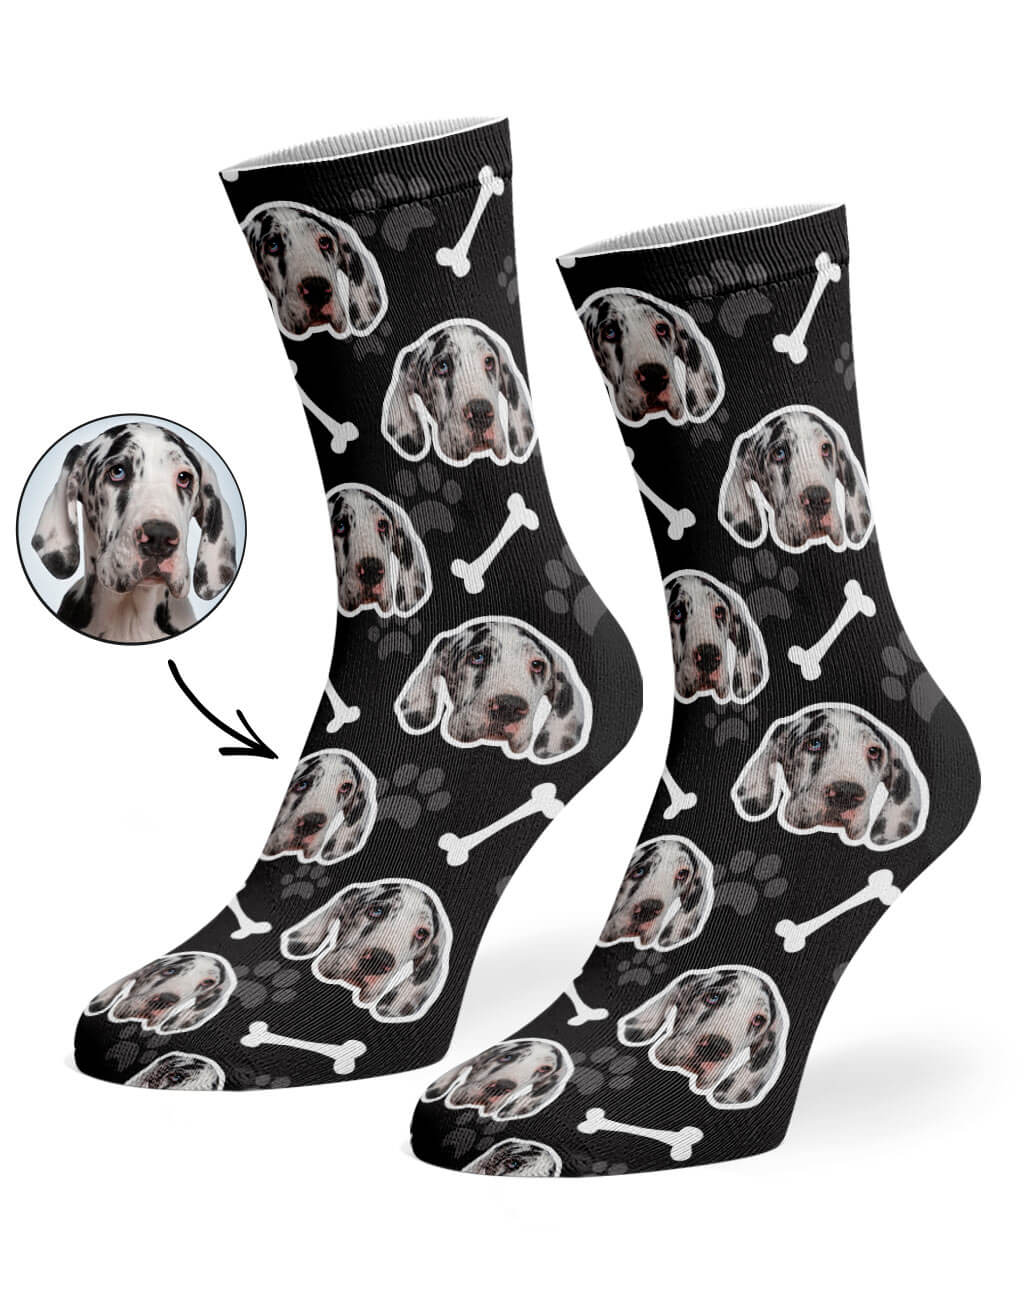 customize your socks featuring your dog